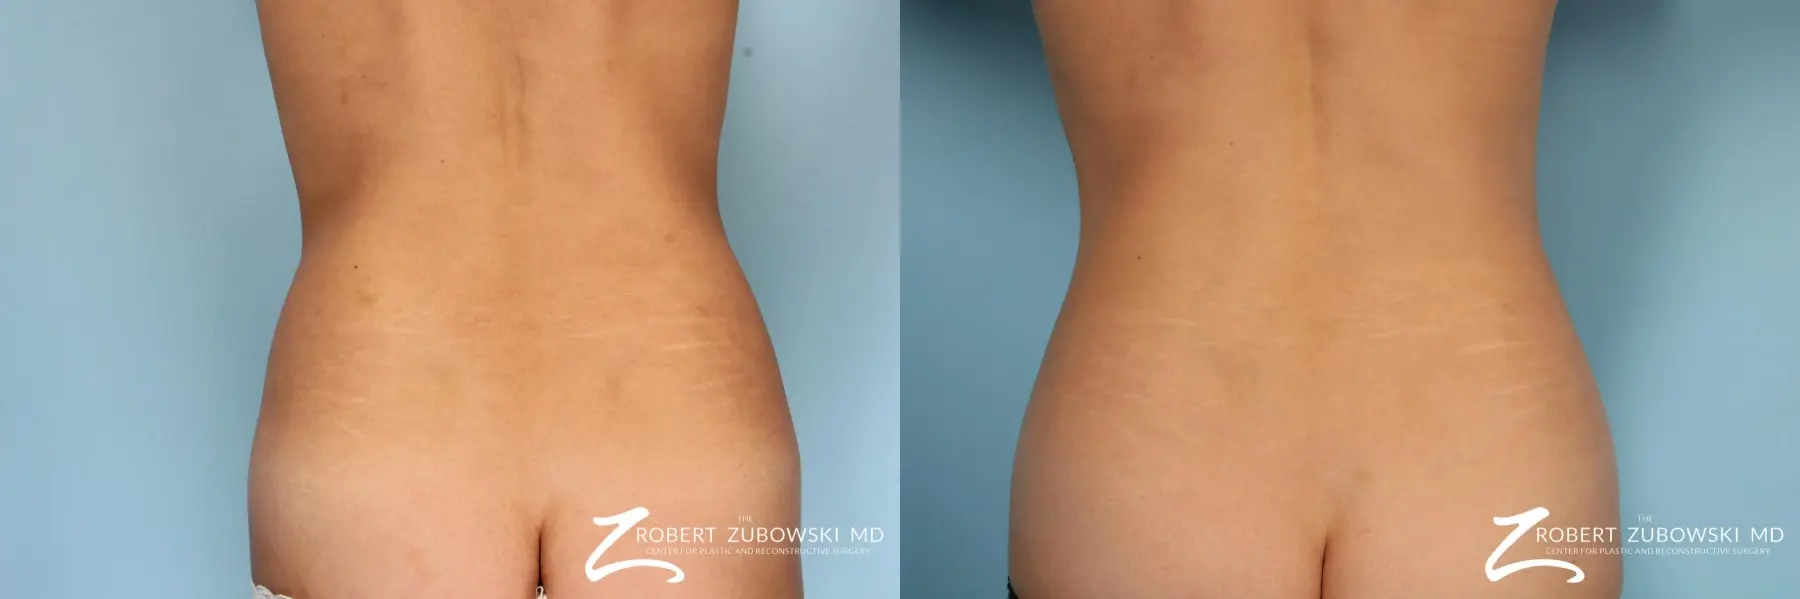 CoolSculpting®: Patient 5 - Before and After 1